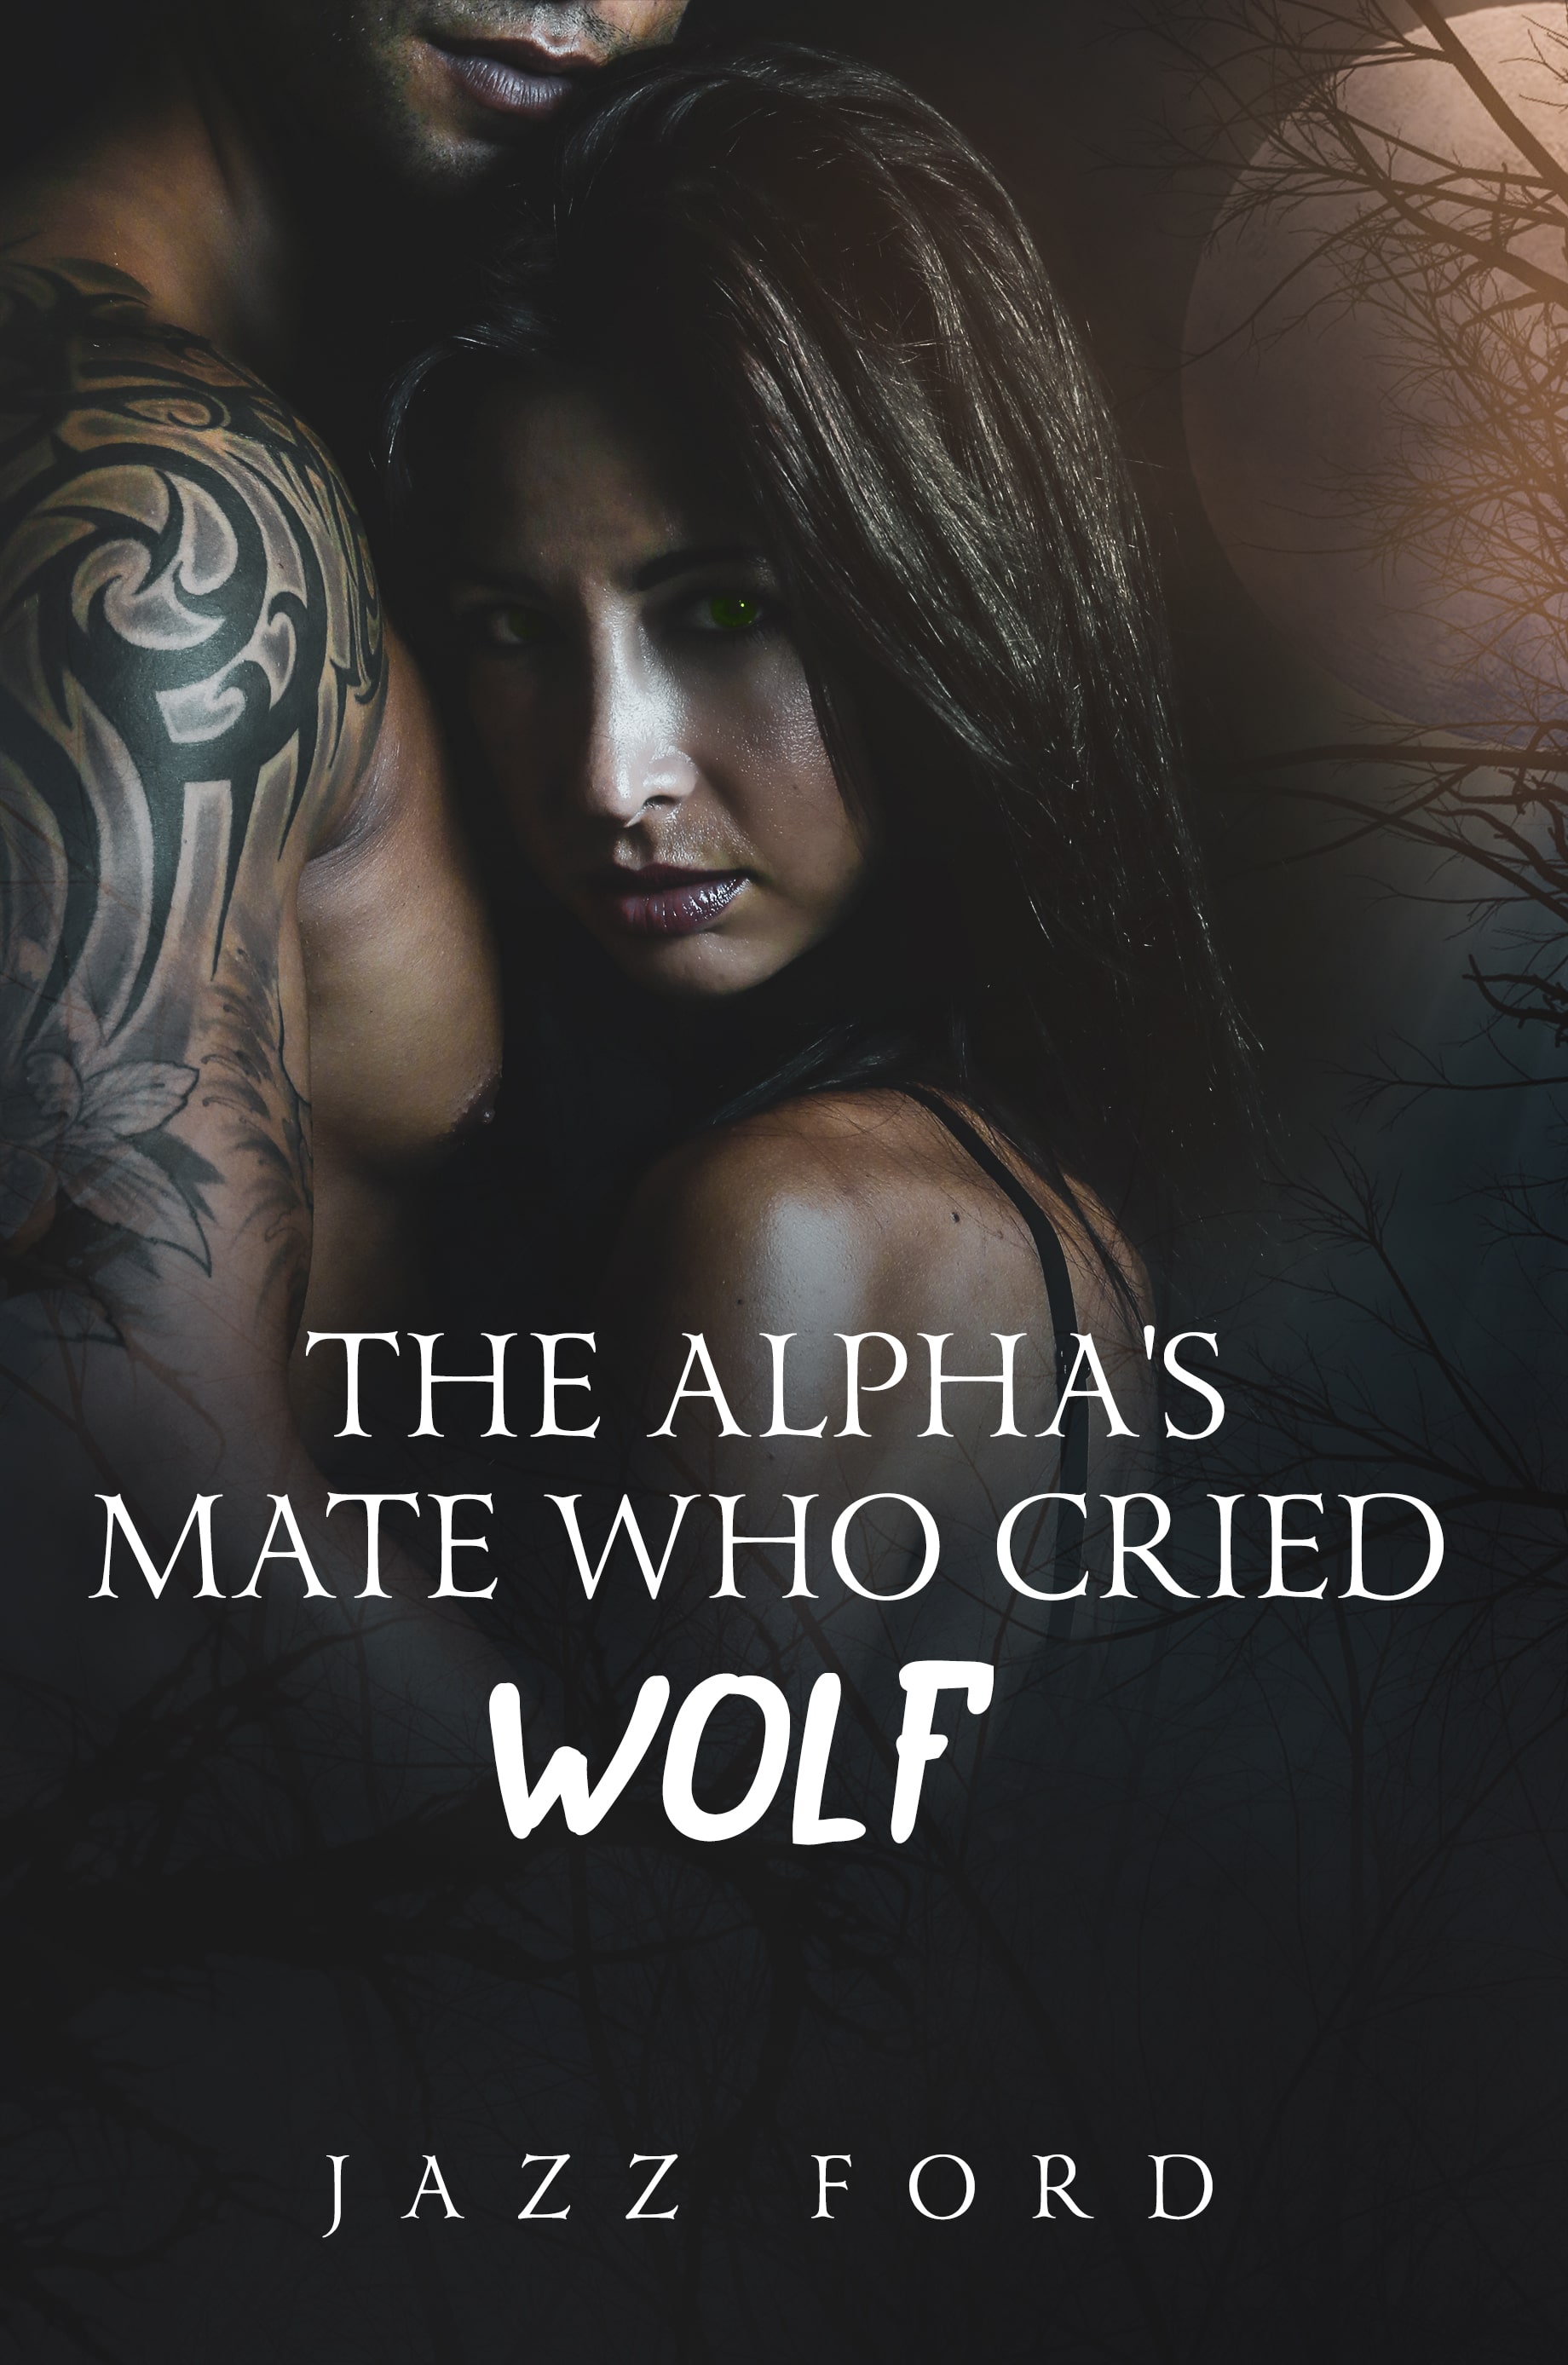 The alphas mate who cried wolf free download a natural history of the senses free pdf download